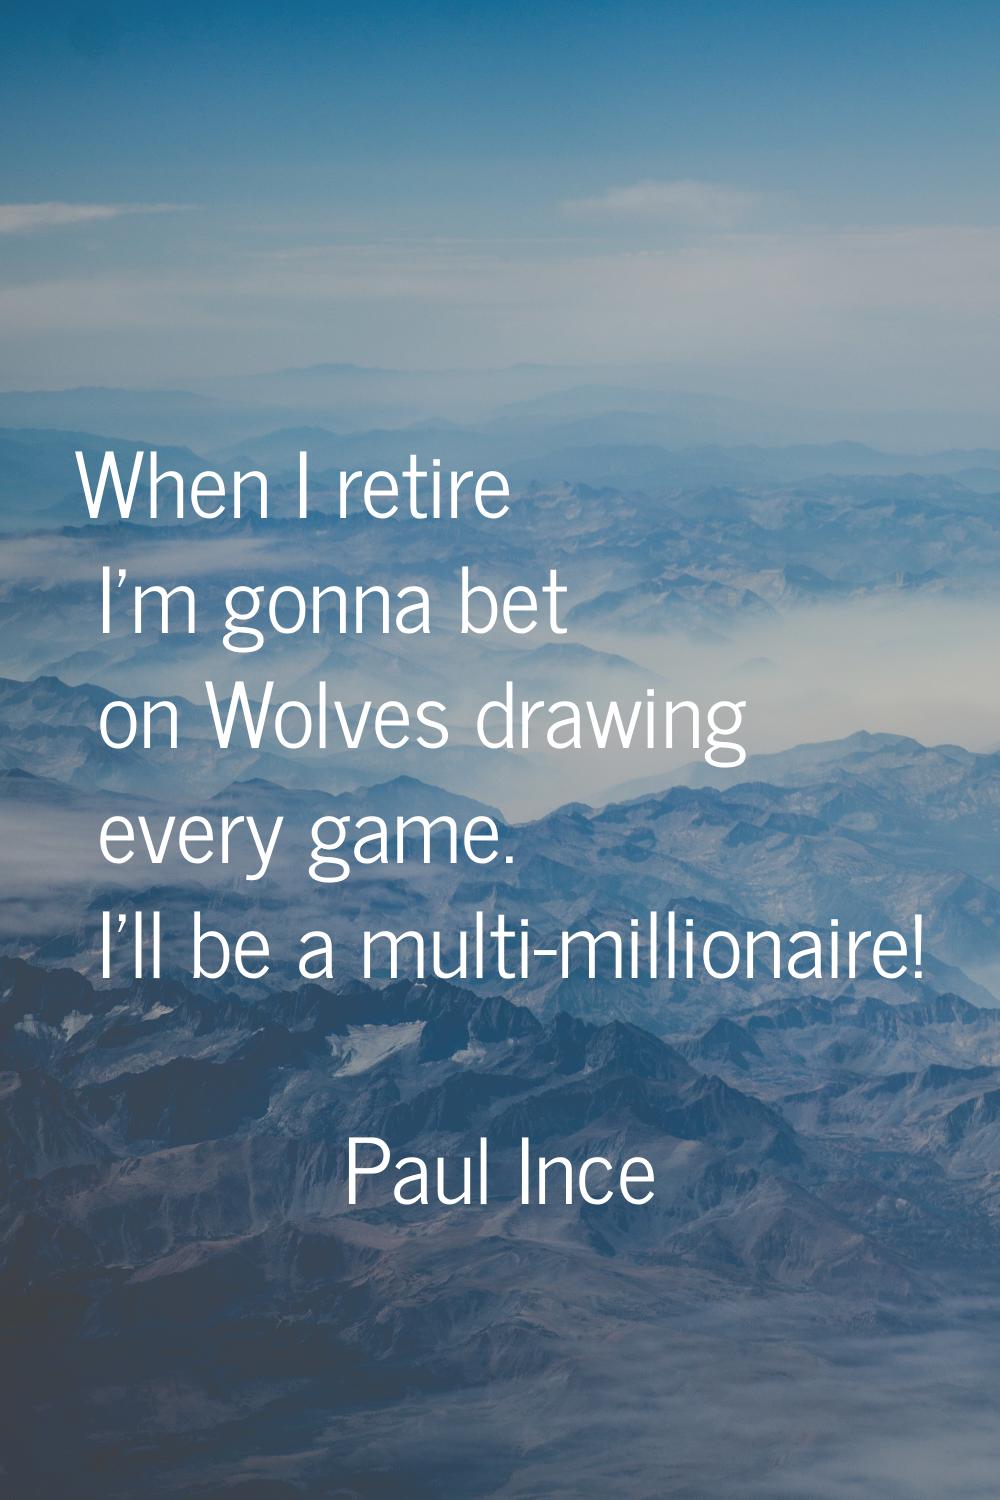 When I retire I'm gonna bet on Wolves drawing every game. I'll be a multi-millionaire!